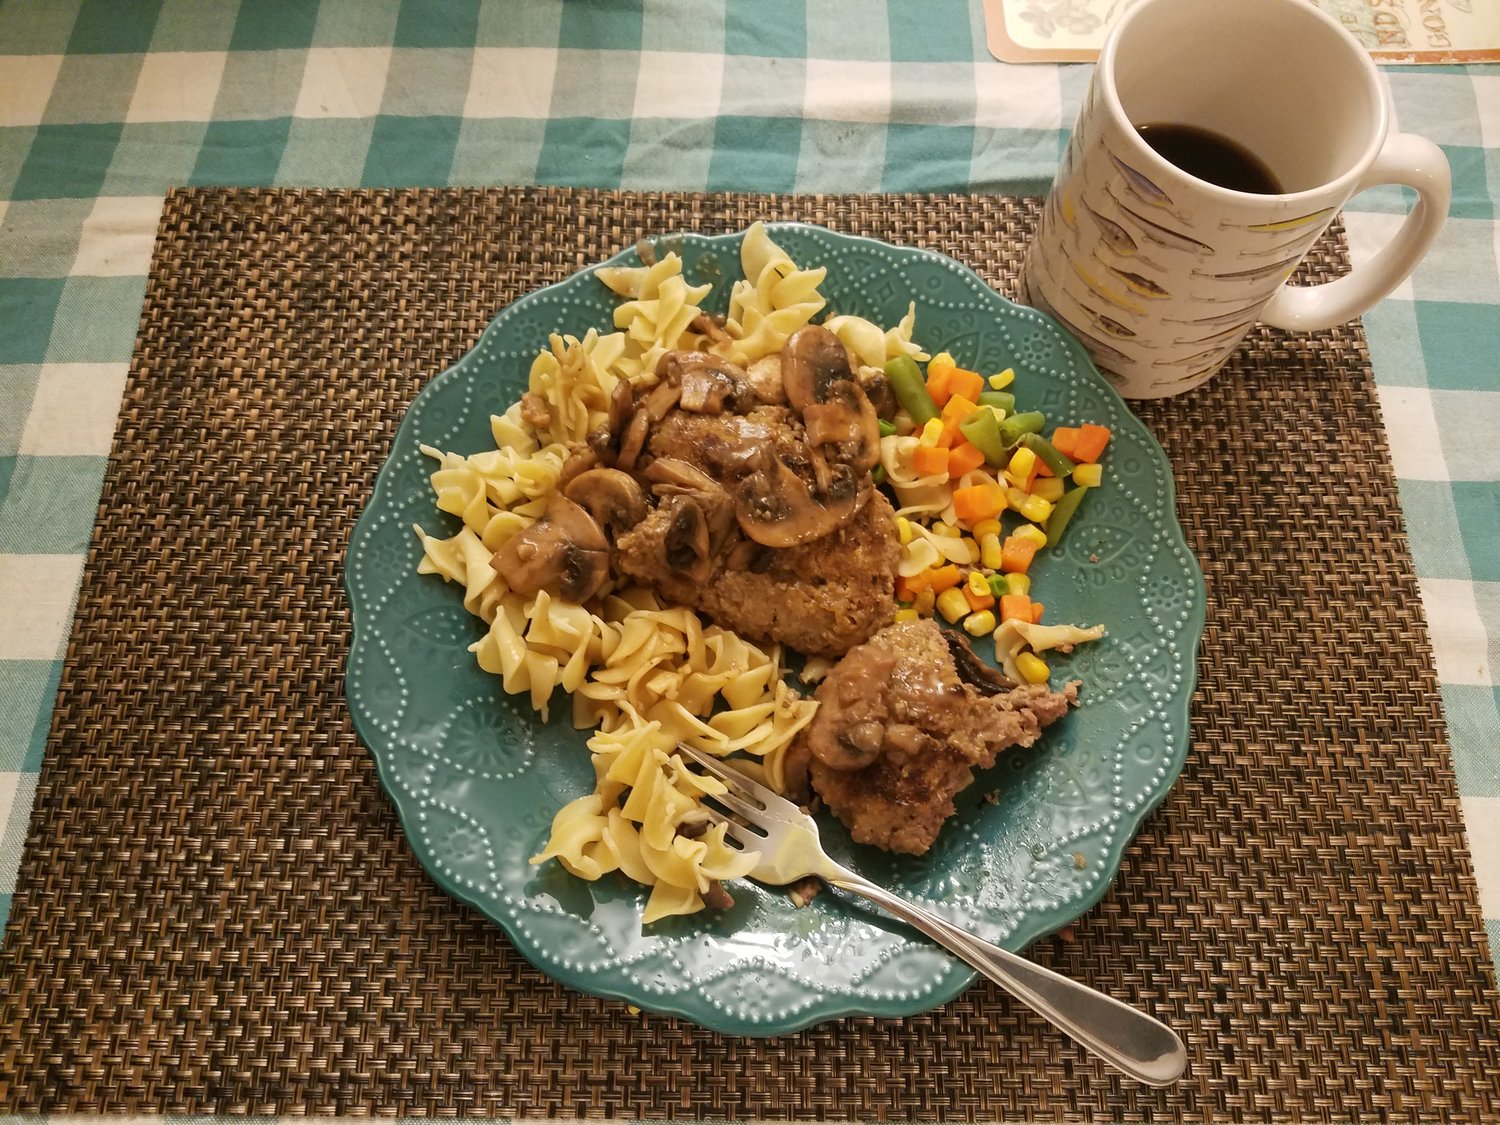 There are few quicker ways to satisfy your hunger than a hearty Salisbury steak.